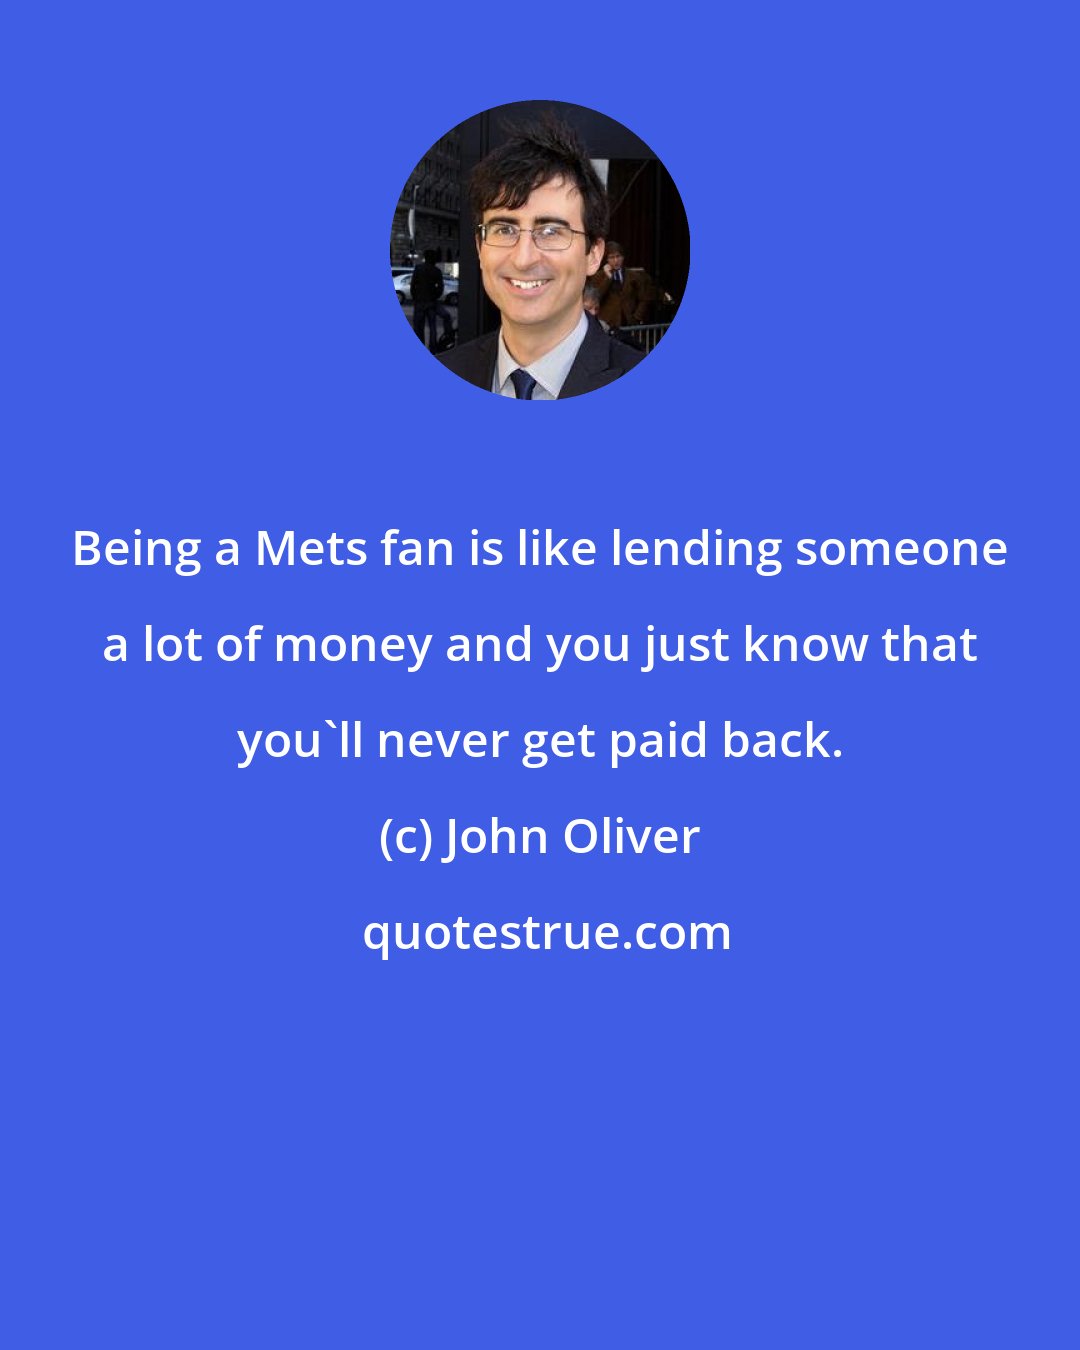 John Oliver: Being a Mets fan is like lending someone a lot of money and you just know that you'll never get paid back.